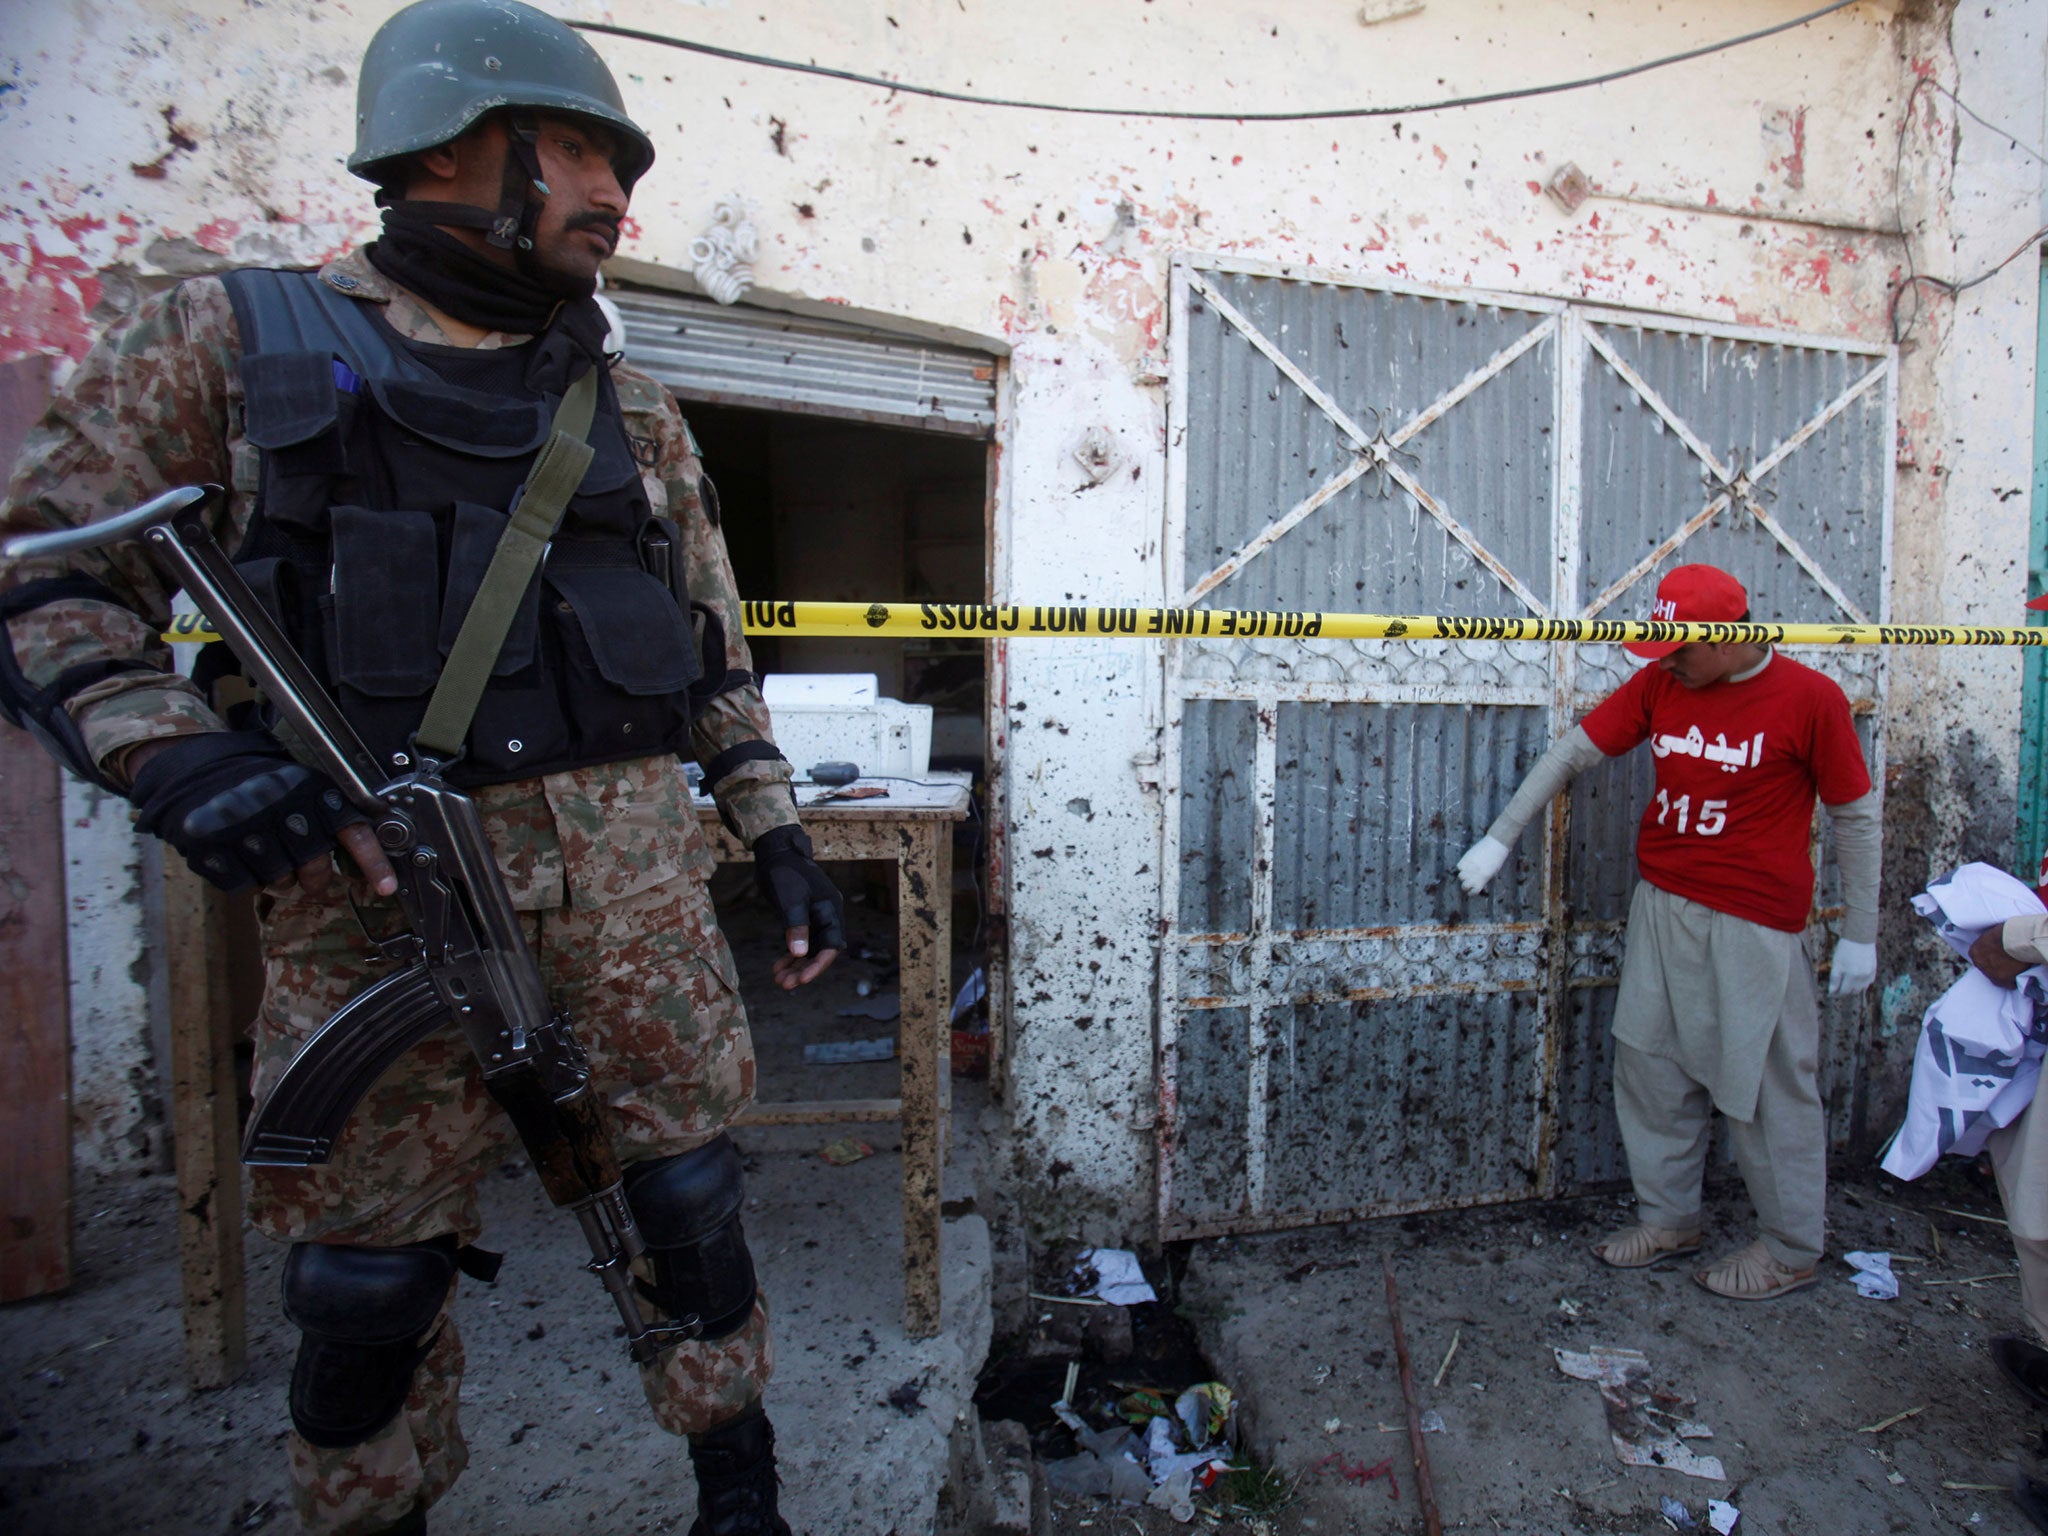 A soldier stands guard as voluteers collect remains of the walls and doors around the site of a blast at the courthouse in Charsadda, Pakistan, 21 February